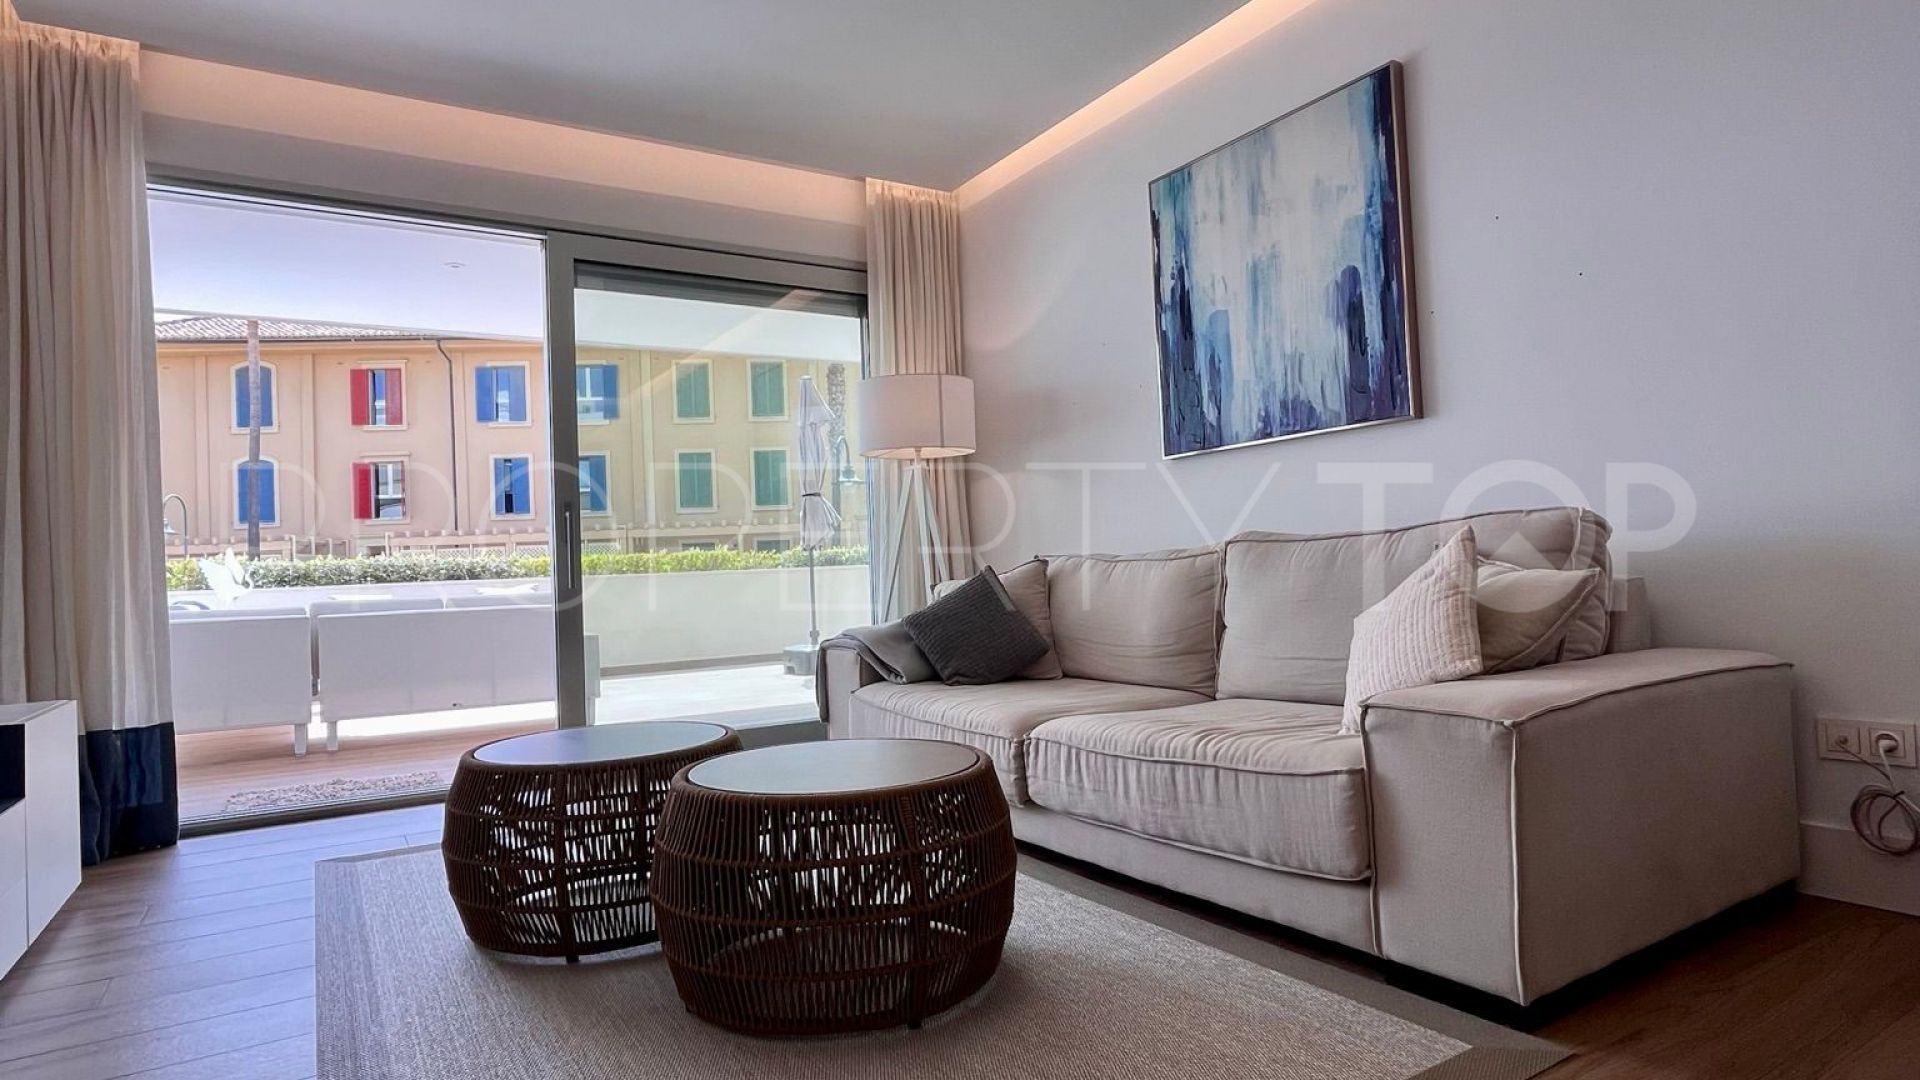 For sale Pier apartment with 2 bedrooms